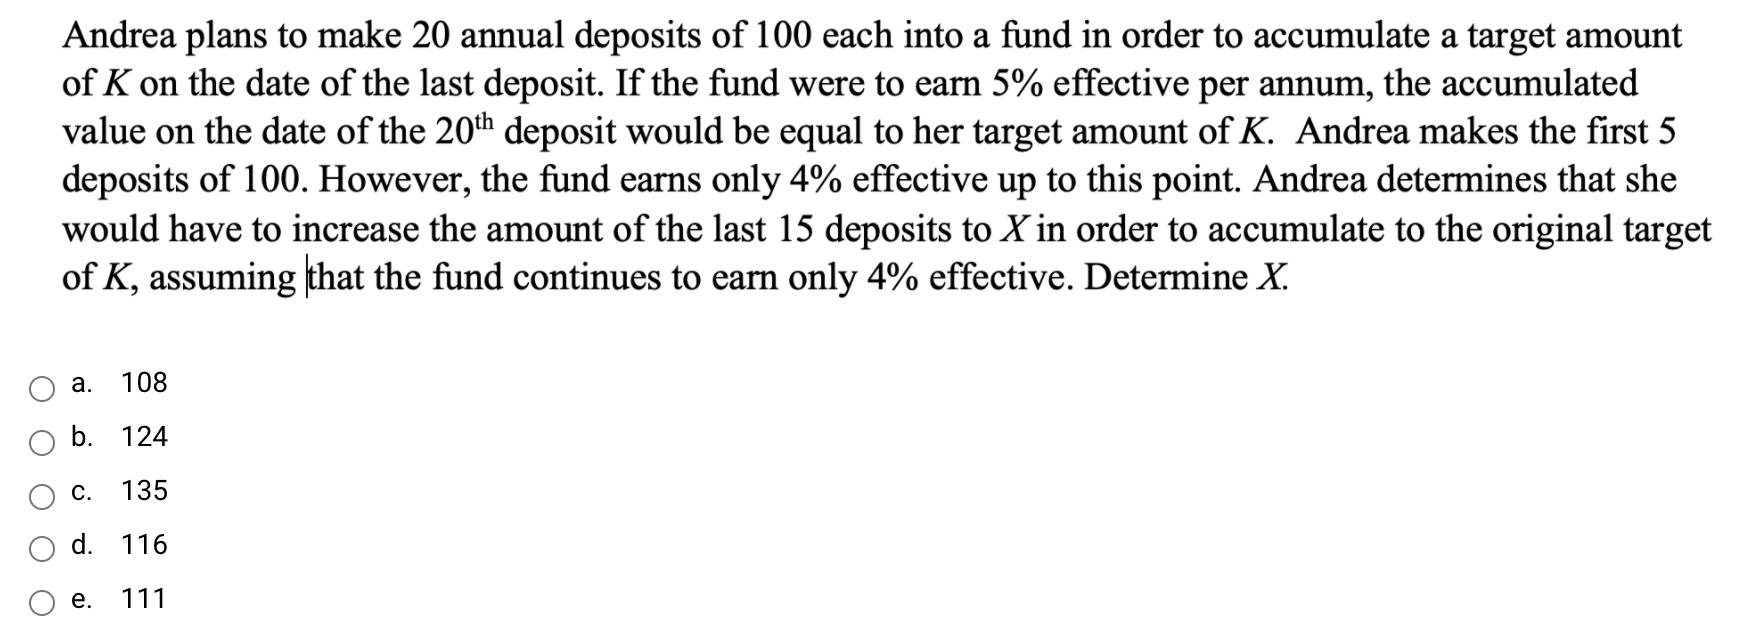 Andrea plans to make 20 annual deposits of 100 each into a fund in order to accumulate a target amount of K on the date of th